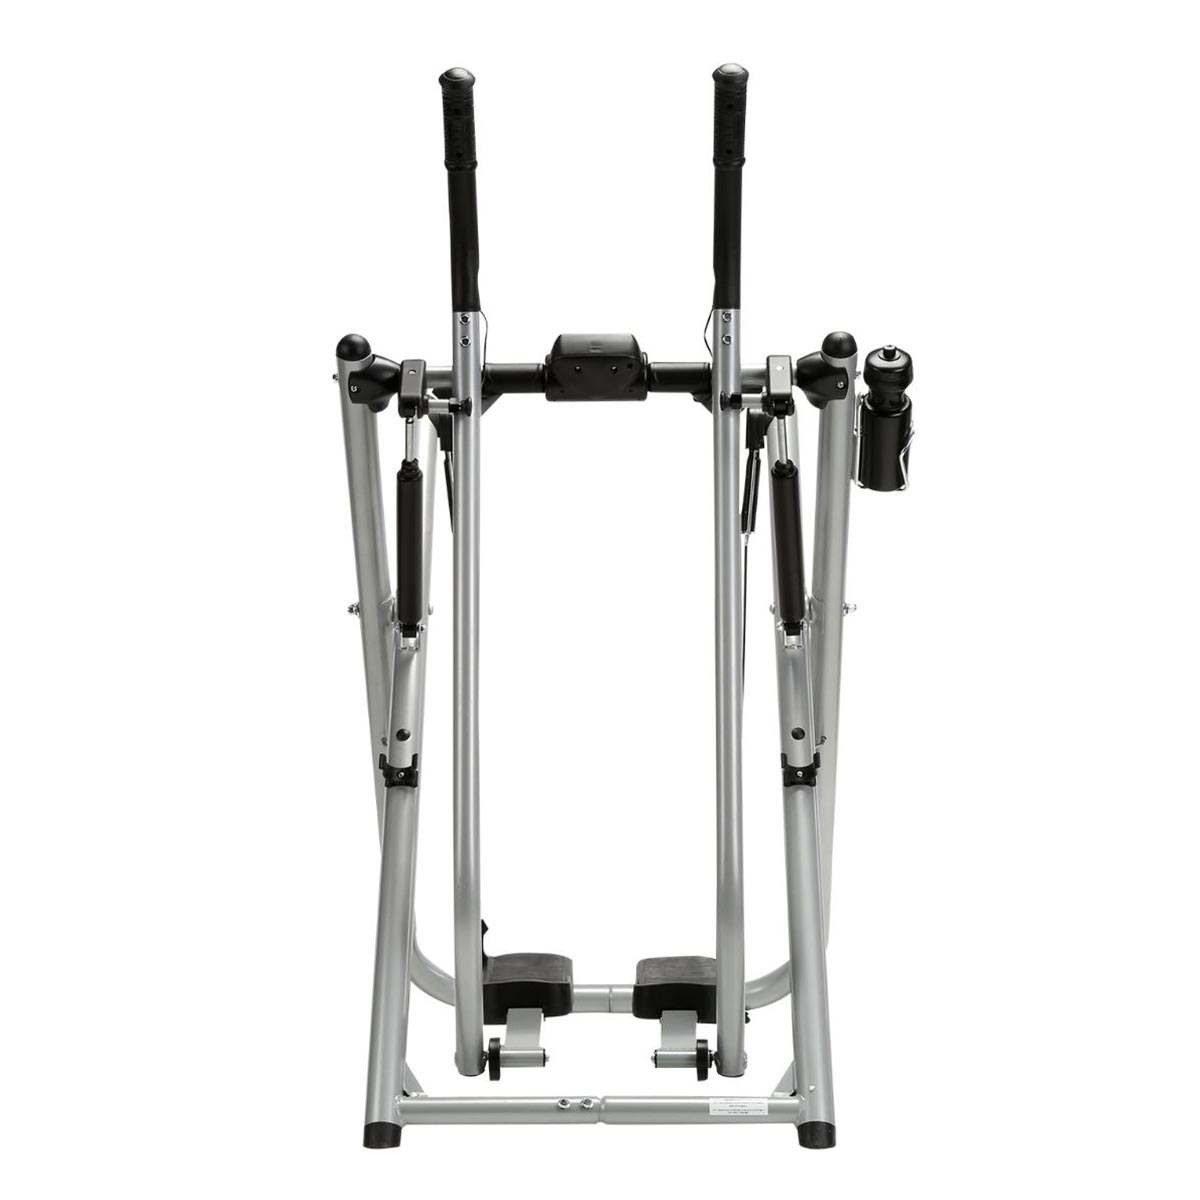 Gazelle Supreme Glider Home Workout & Fitness Machine with Instructional DVD - image 5 of 10